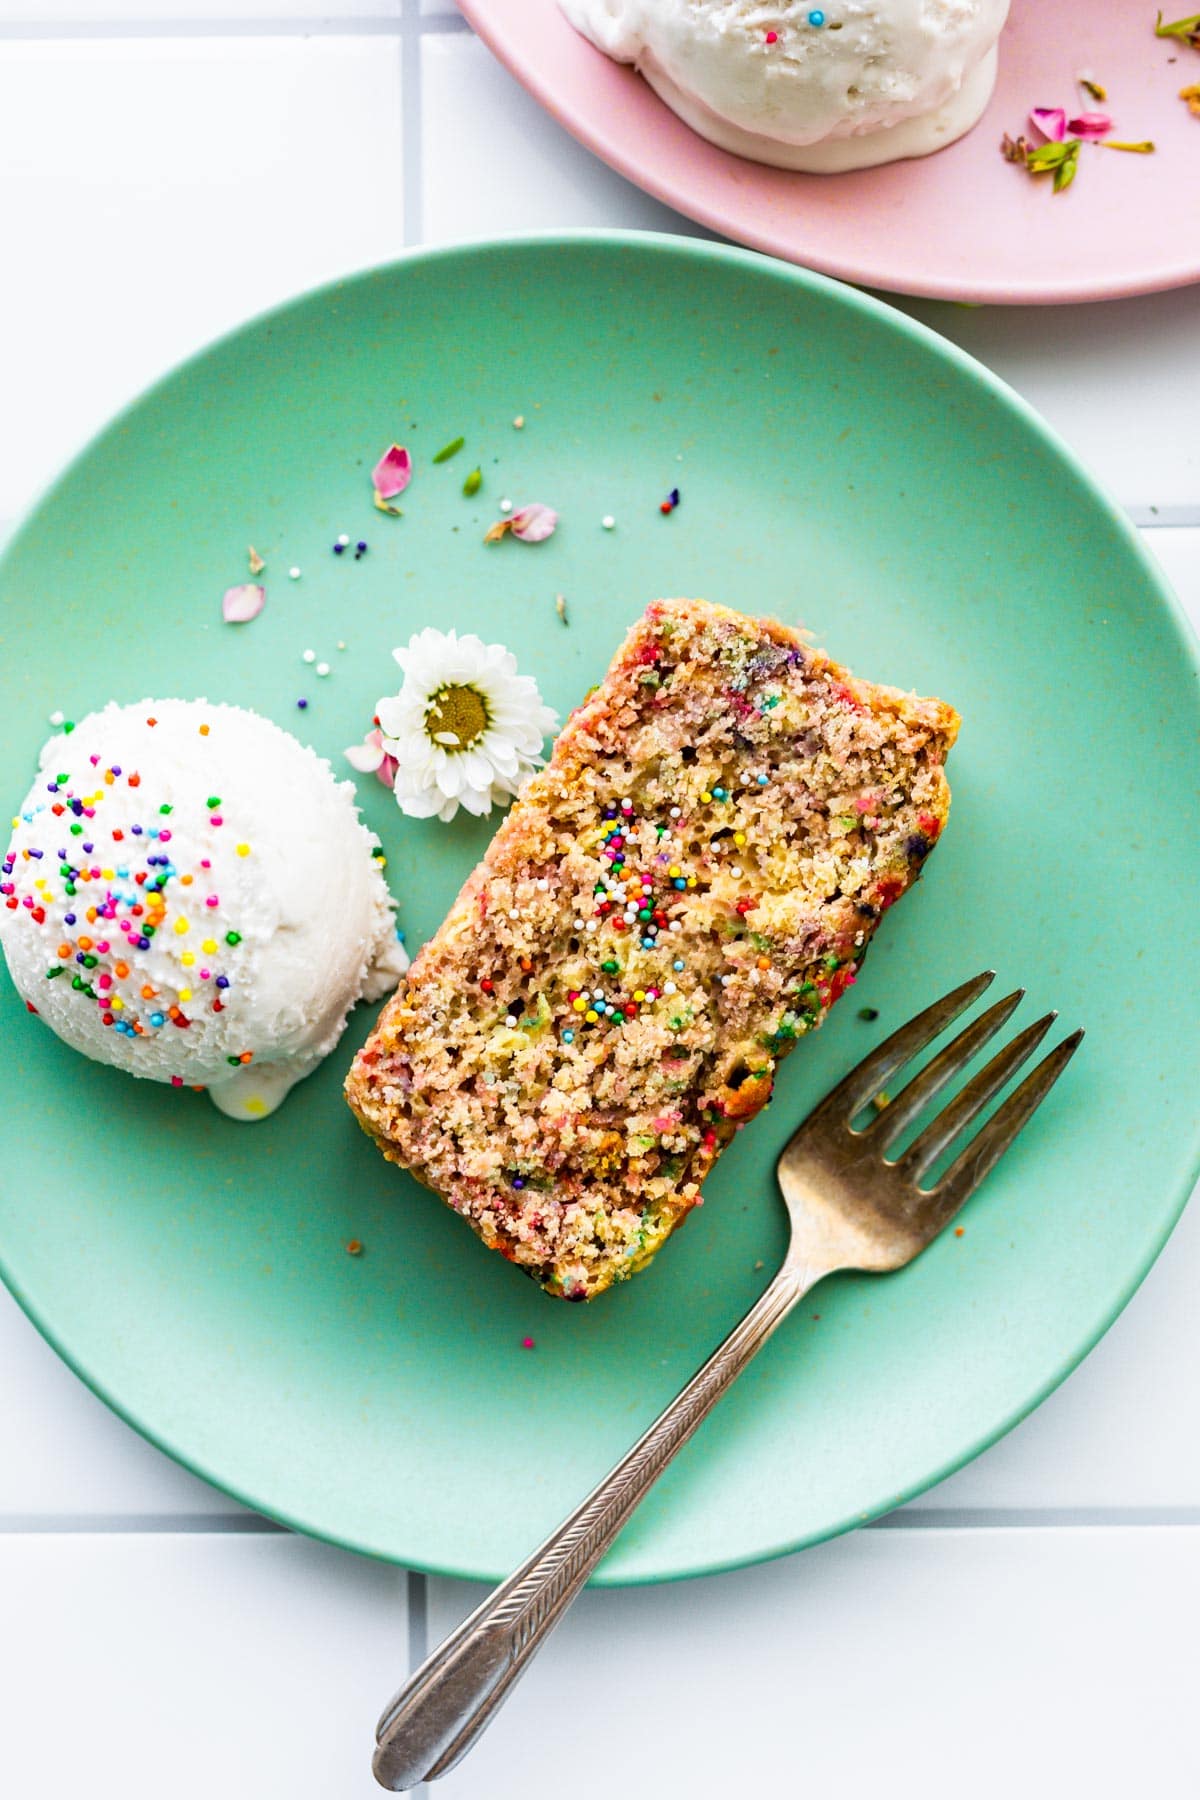 ice cream bread with colored sprinkles on mint green plate with a fork